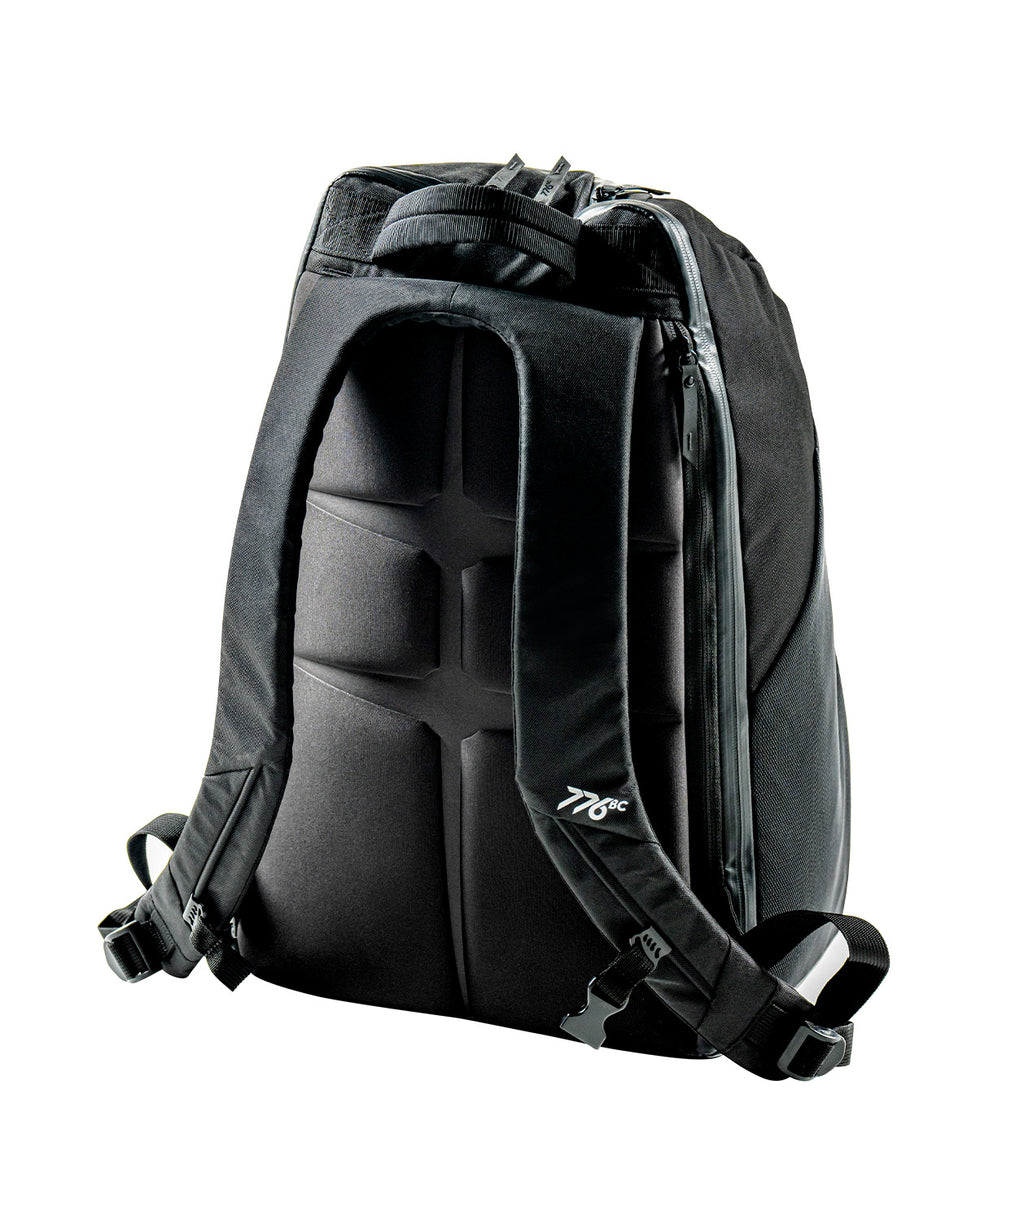 Rowing Australia Supporter Club Pro Tour Backpack - Black